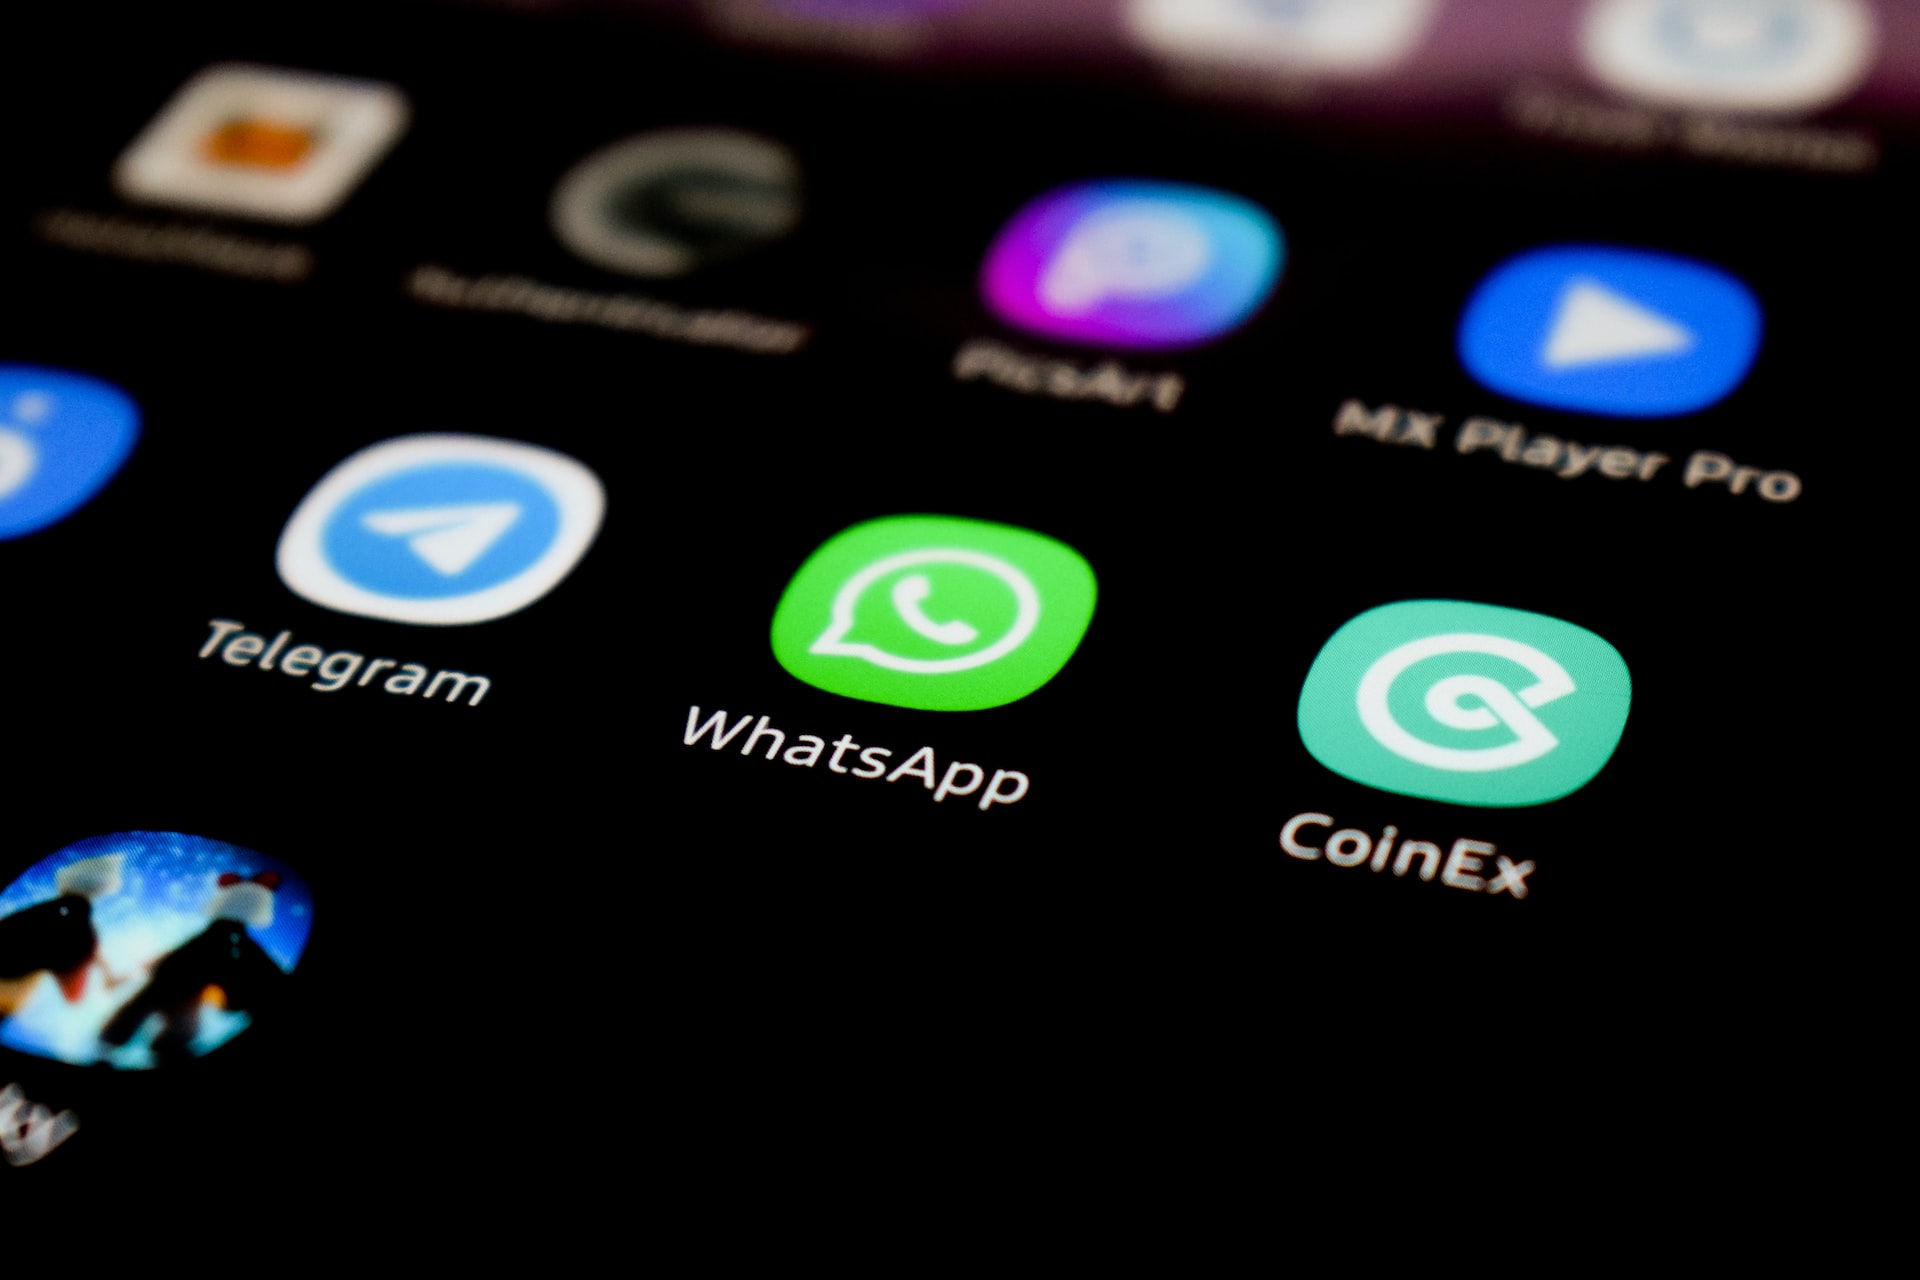 WhatsApp to End Support for 49 Smartphone Models on December 31, 2022